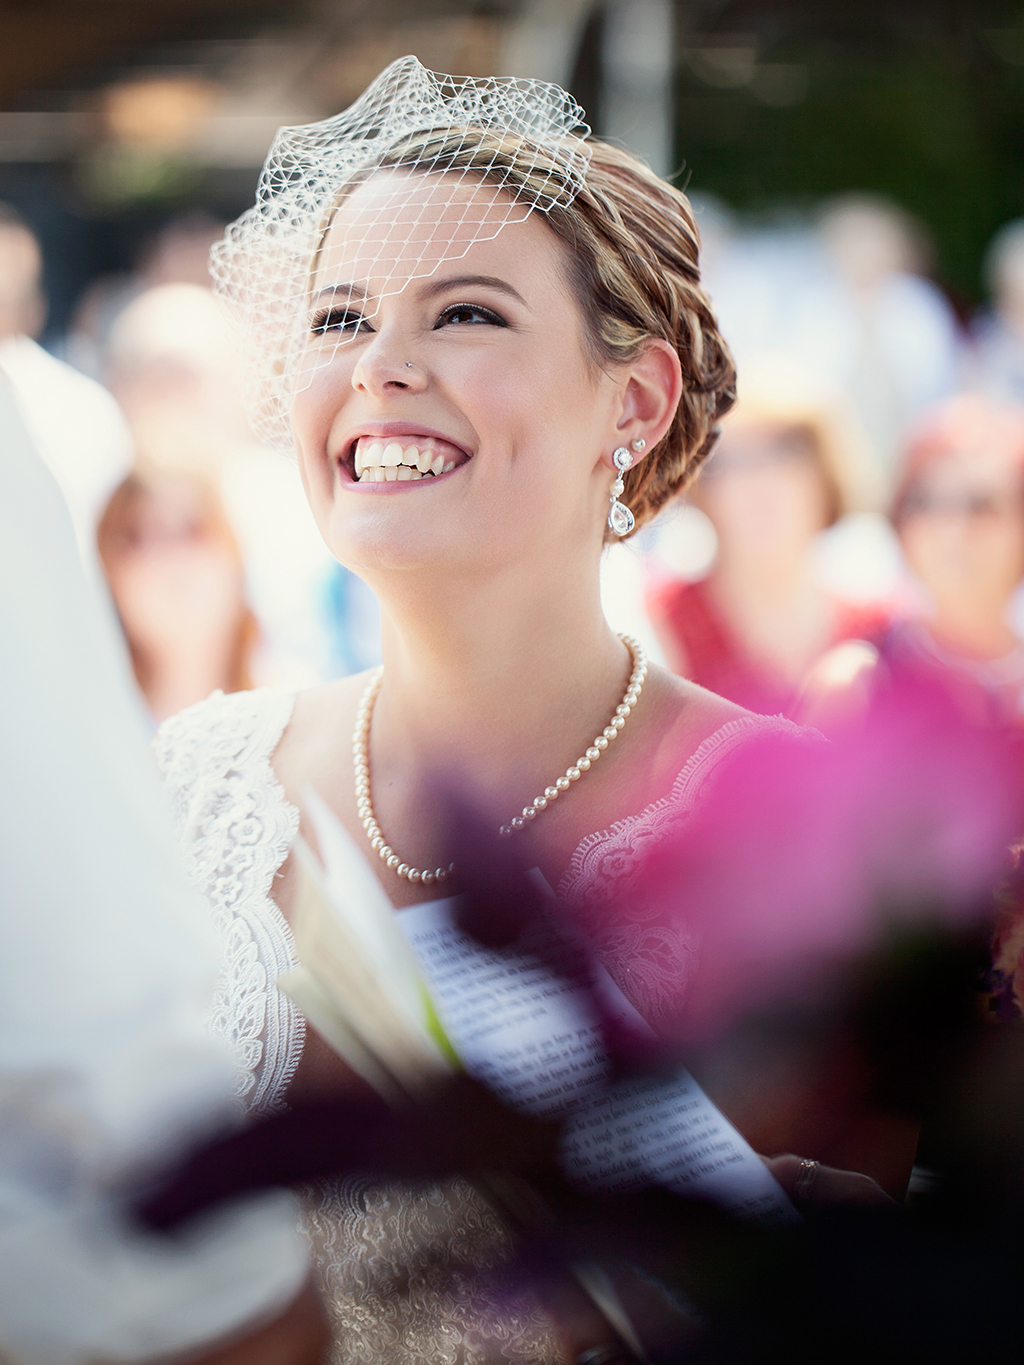 A bride grins as her groom recites his vows during a wedding ceremony in Kelowna.